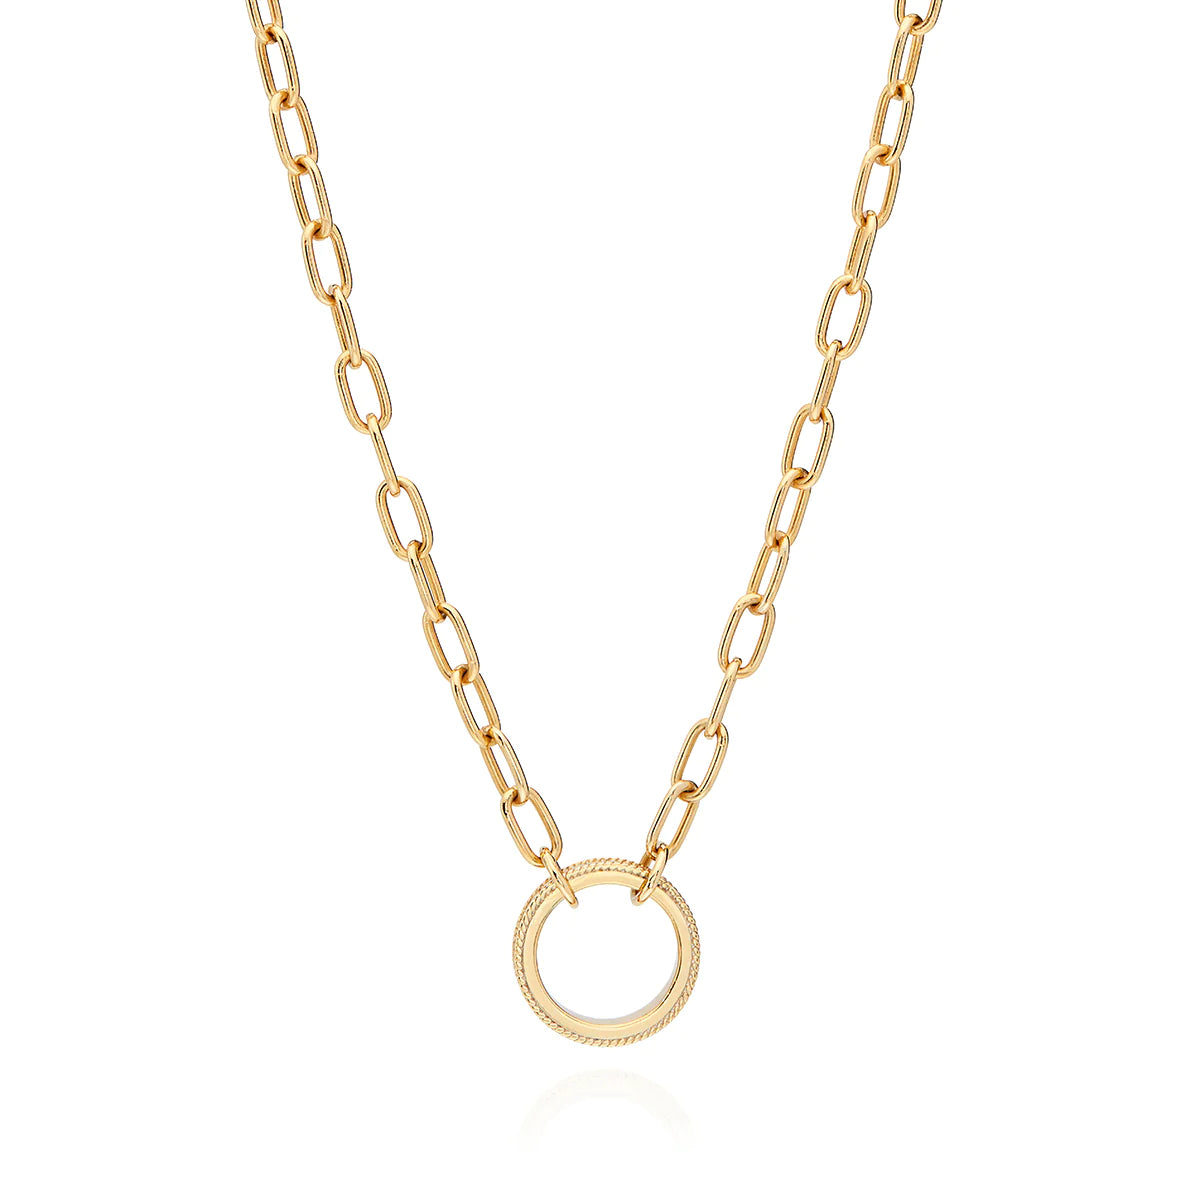 Gold Sterling silver plated necklace with elongated box chain and an open  circle charm